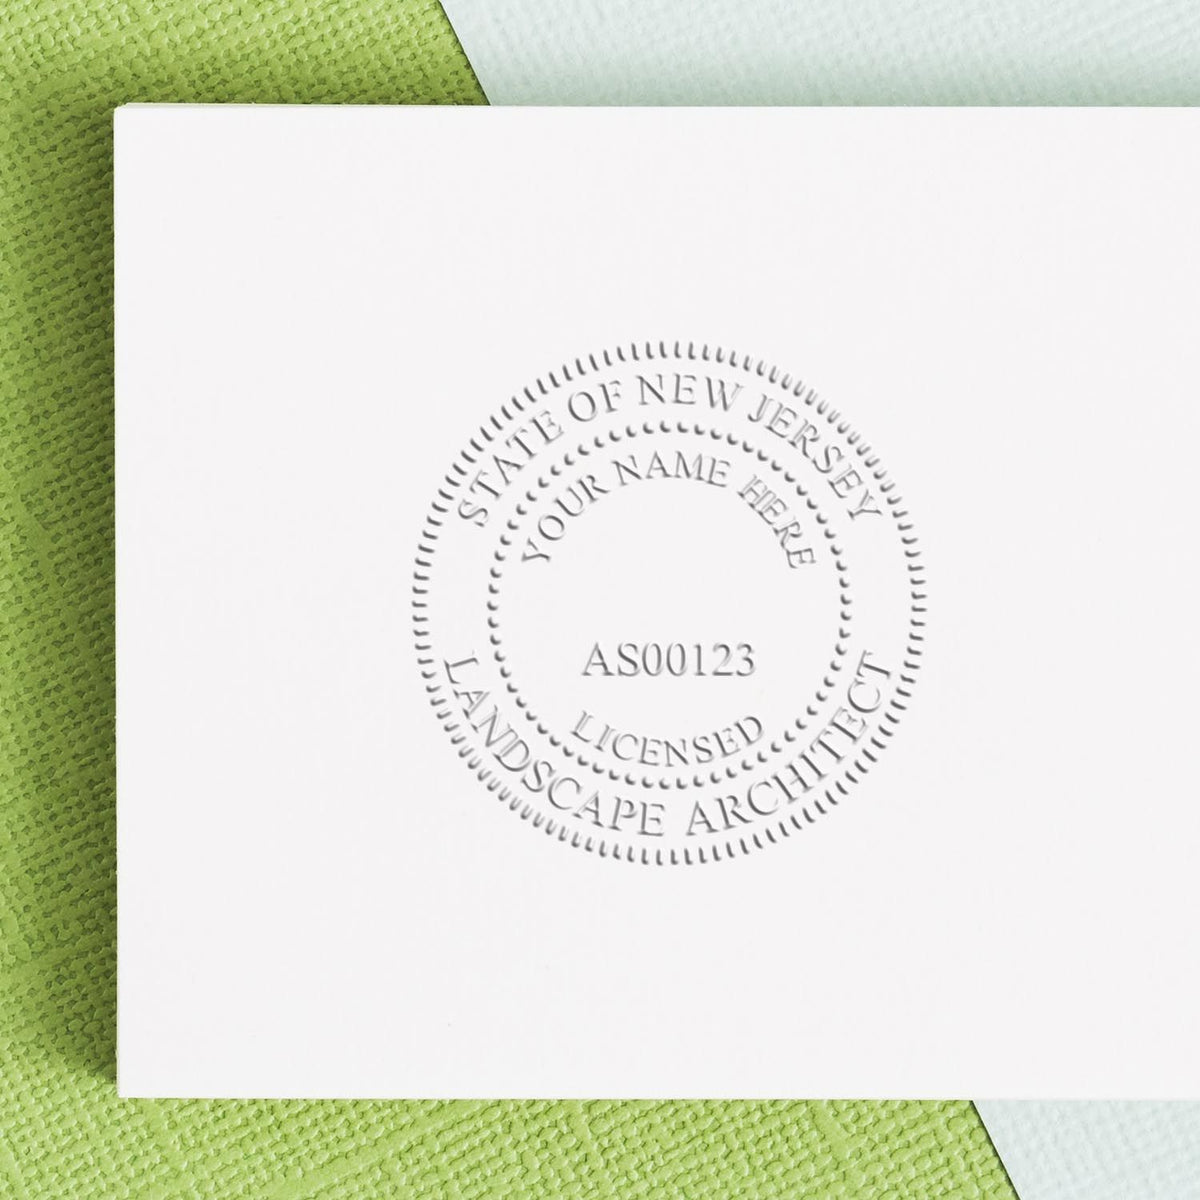 An in use photo of the Gift New Jersey Landscape Architect Seal showing a sample imprint on a cardstock